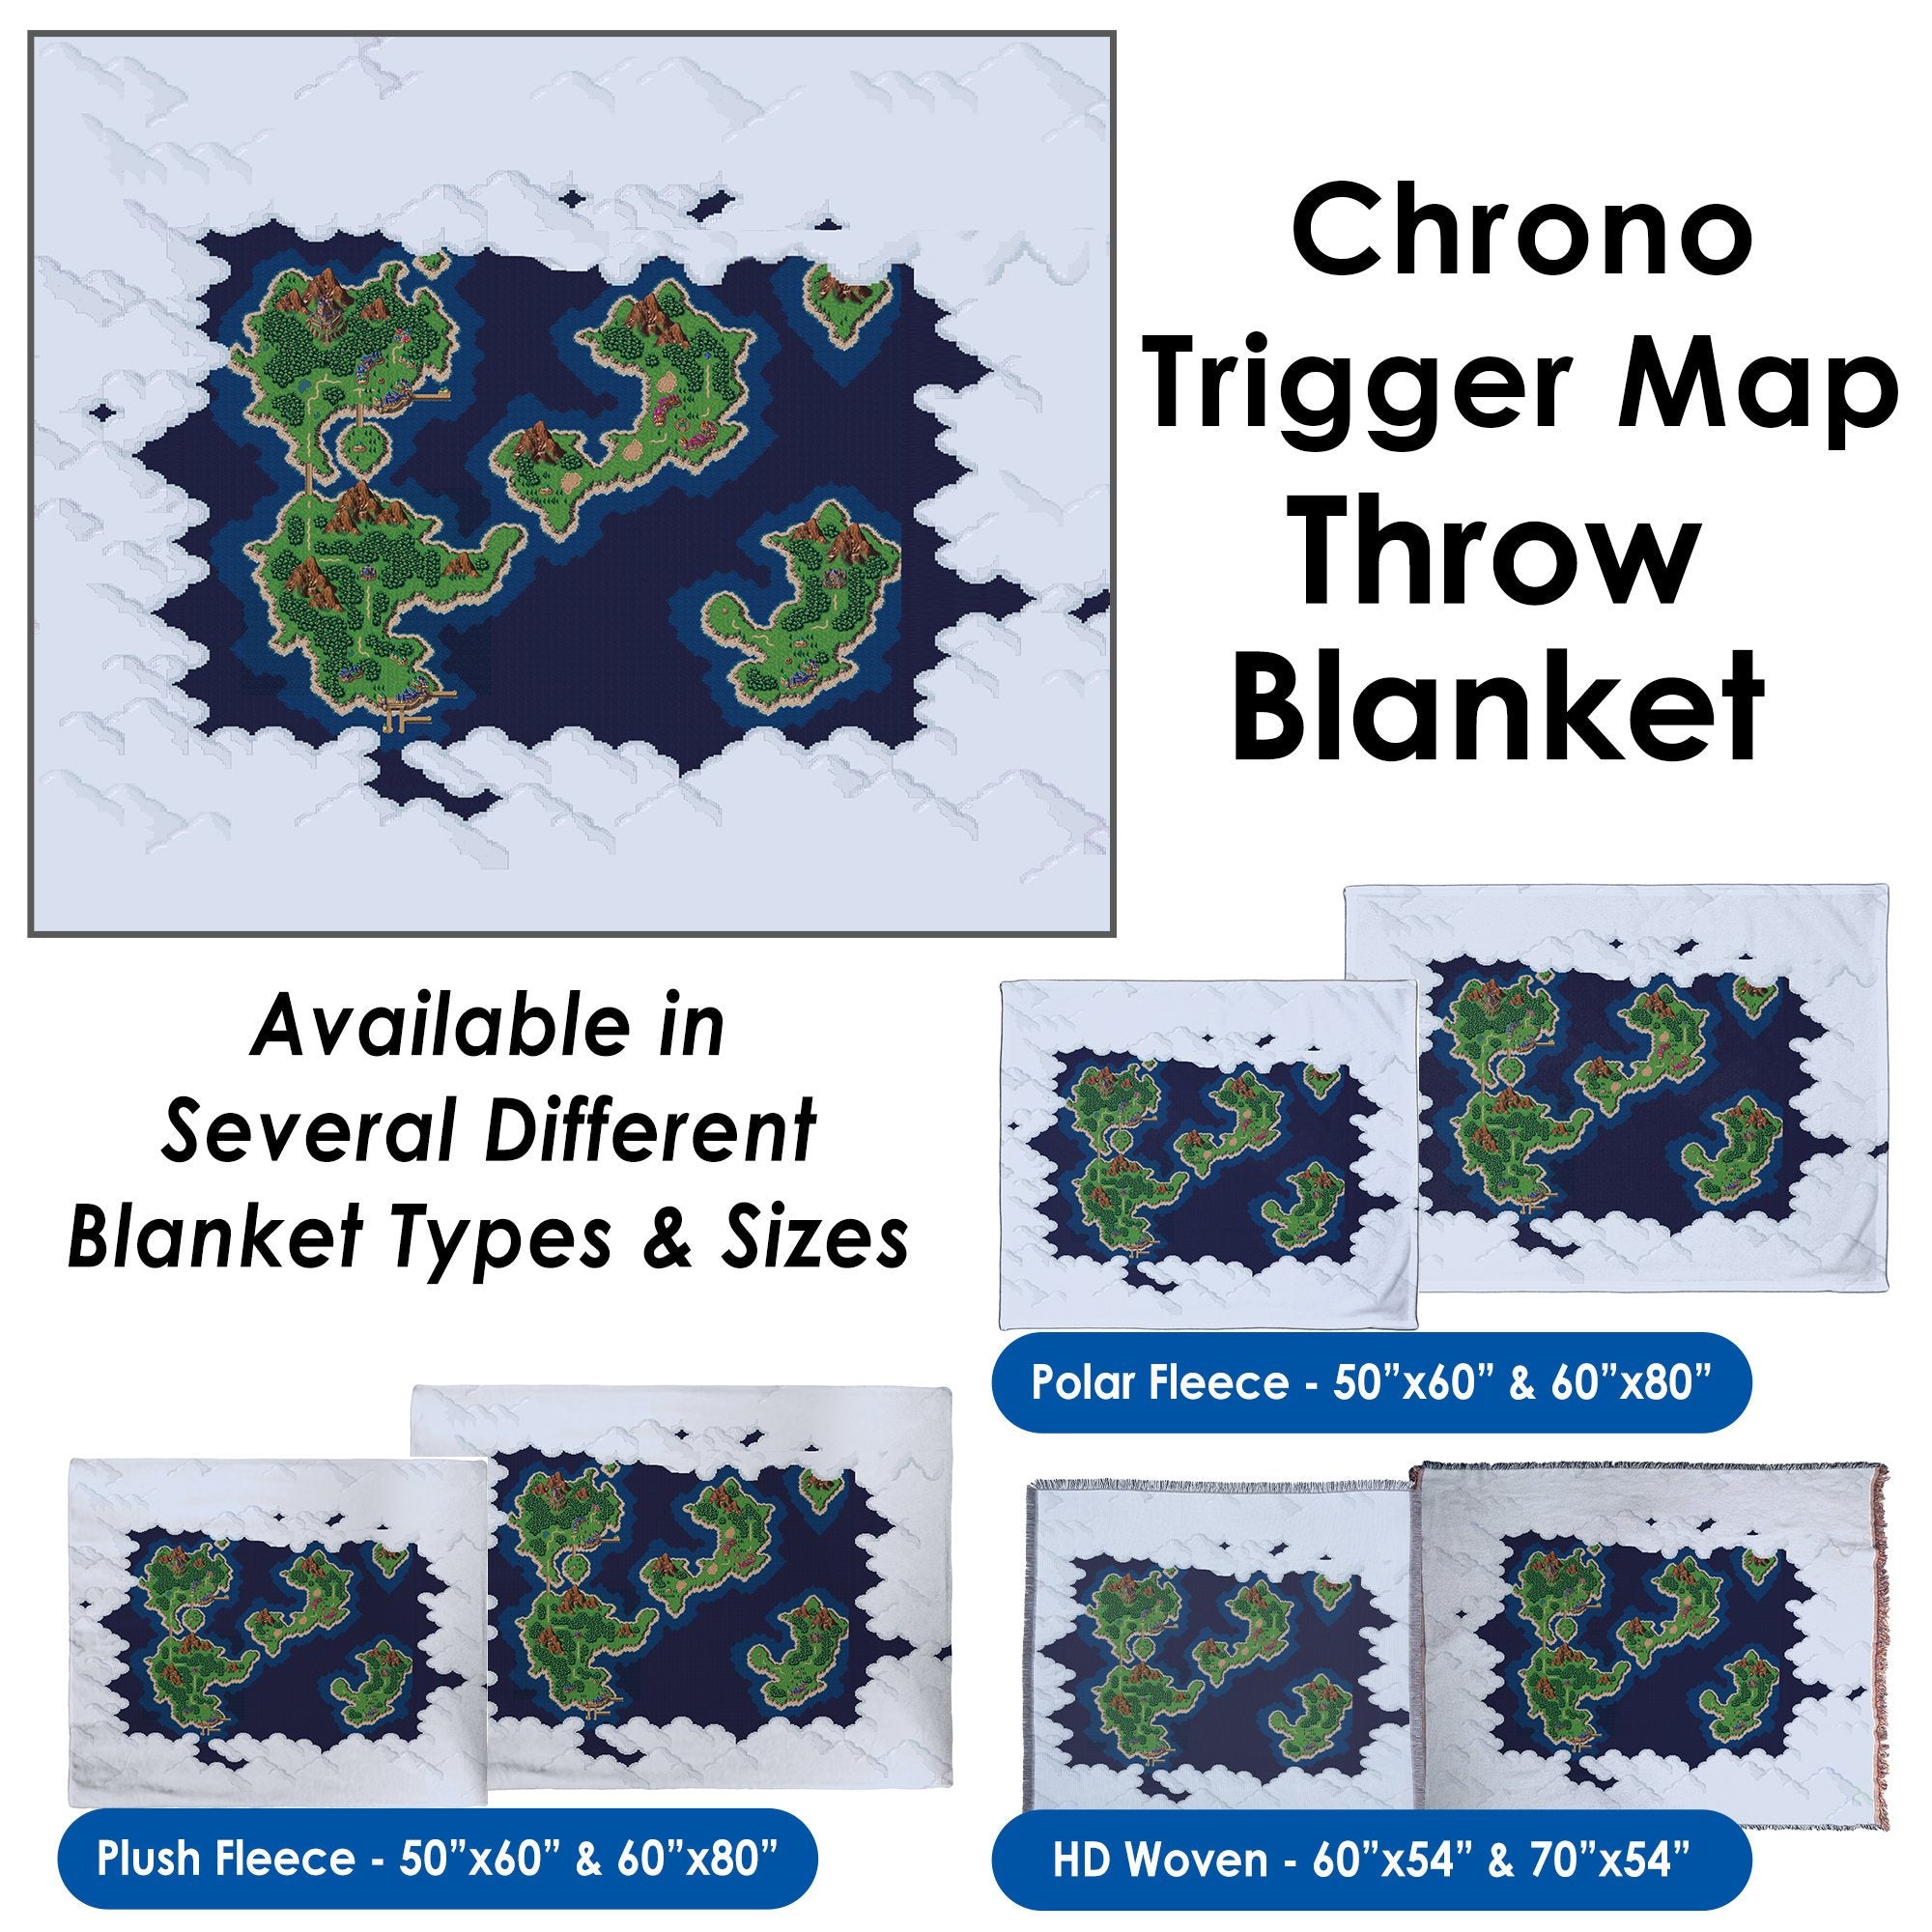 Chrono Trigger World Map - Throw Blanket / Tapestry Wall Hanging